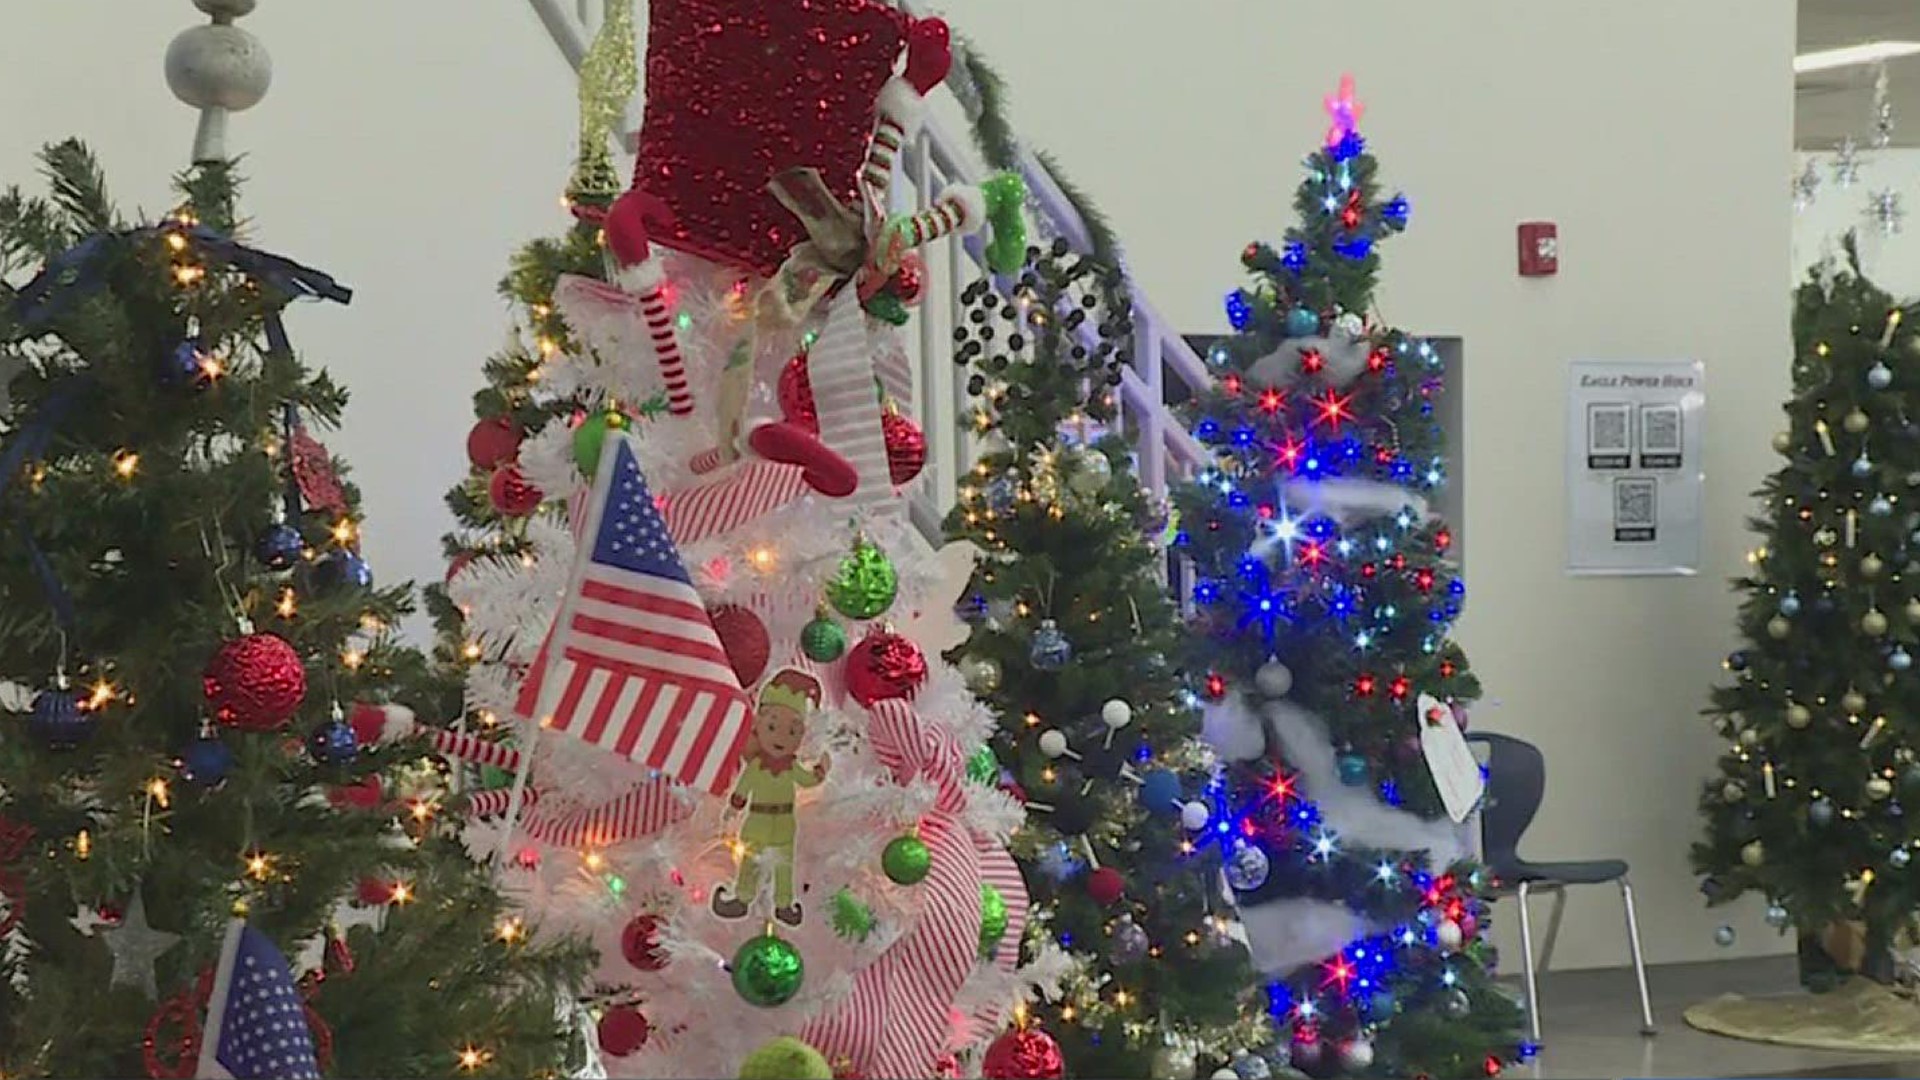 Students at Veterans Memorial High School have decorated over 30 trees and are looking for local heroes to gift them to.